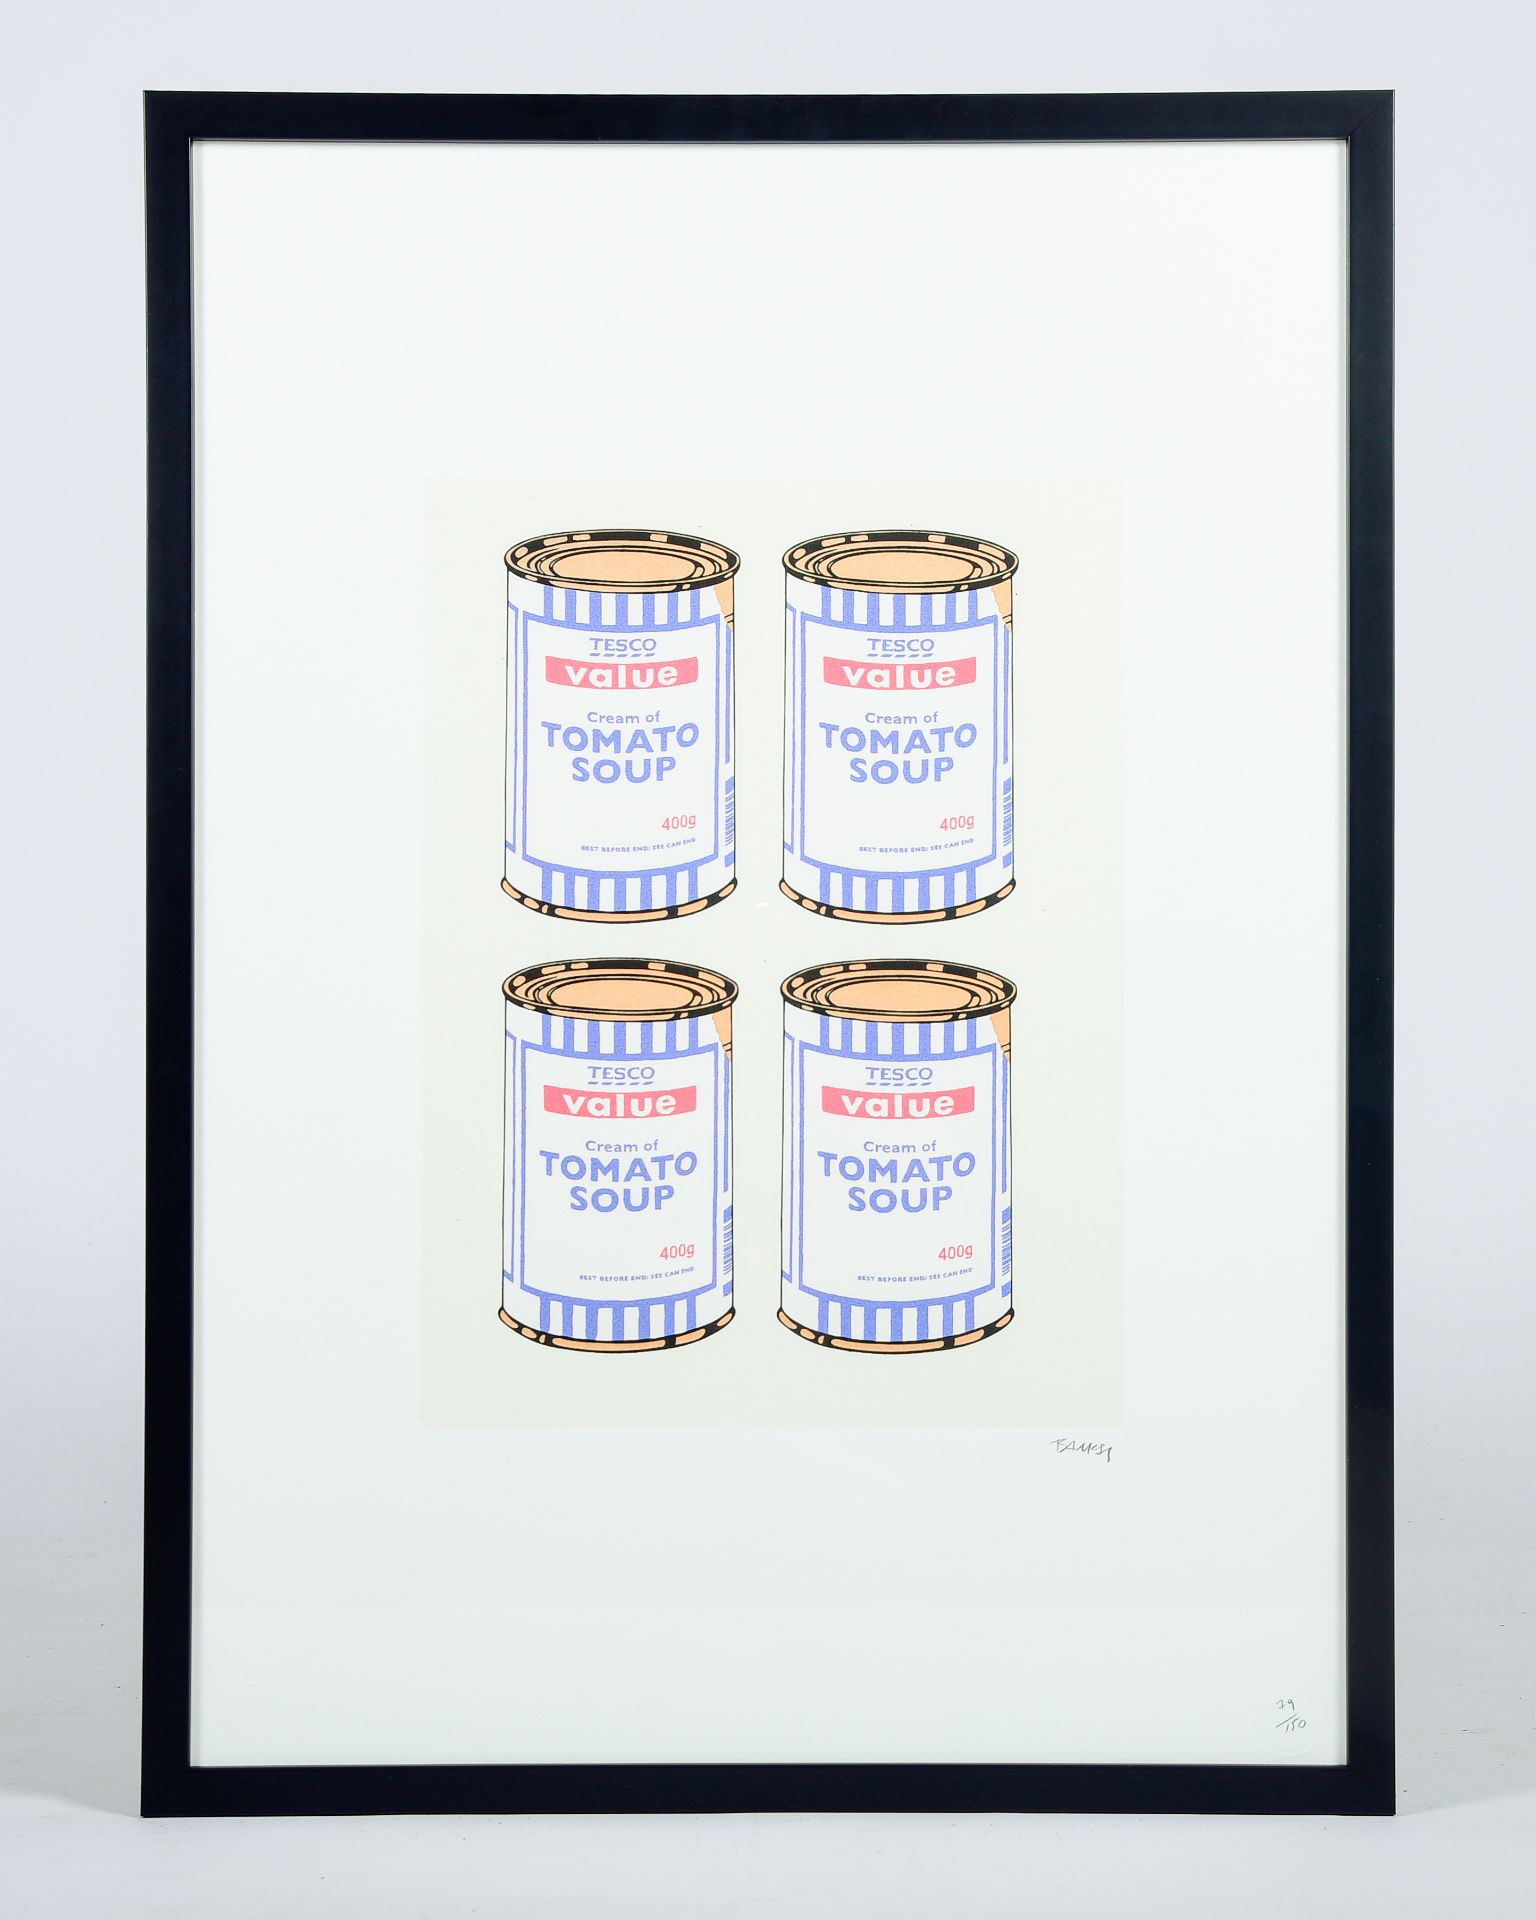 Banksy (1974, after): 'Soup cans', multiple, ed. 79/150 - Image 2 of 5